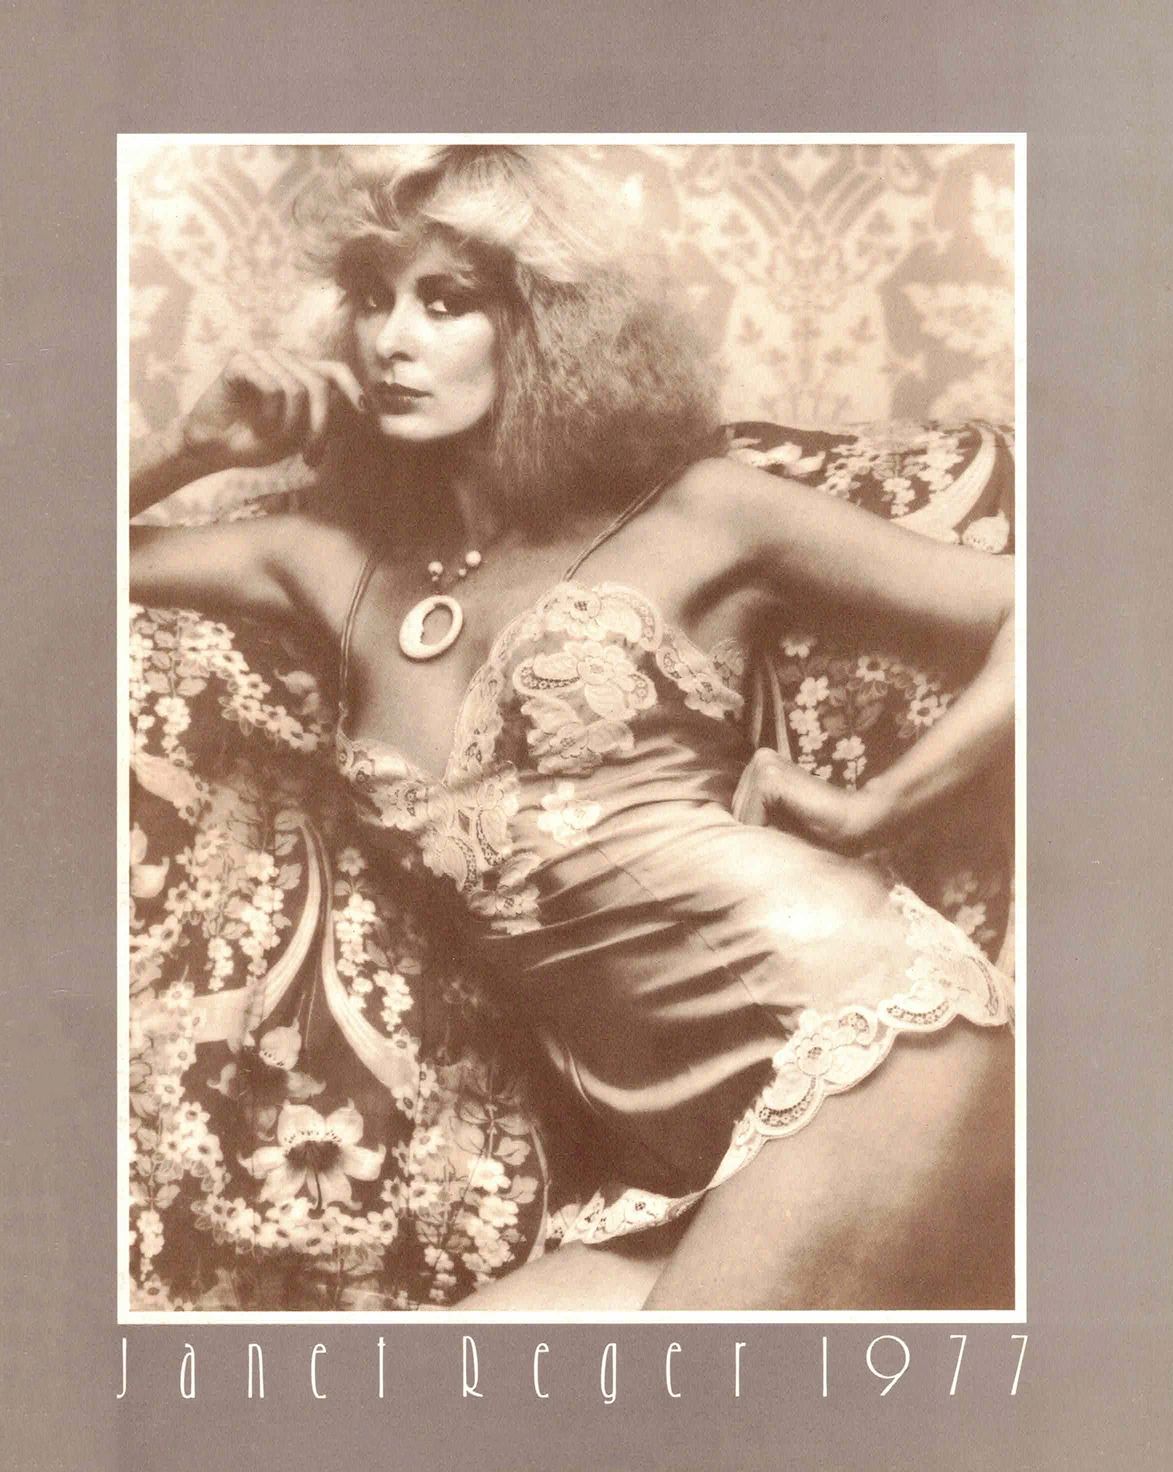 Janet Reger lingerie catalogue 1977. Classic lingerie photographs in a lookbook style.